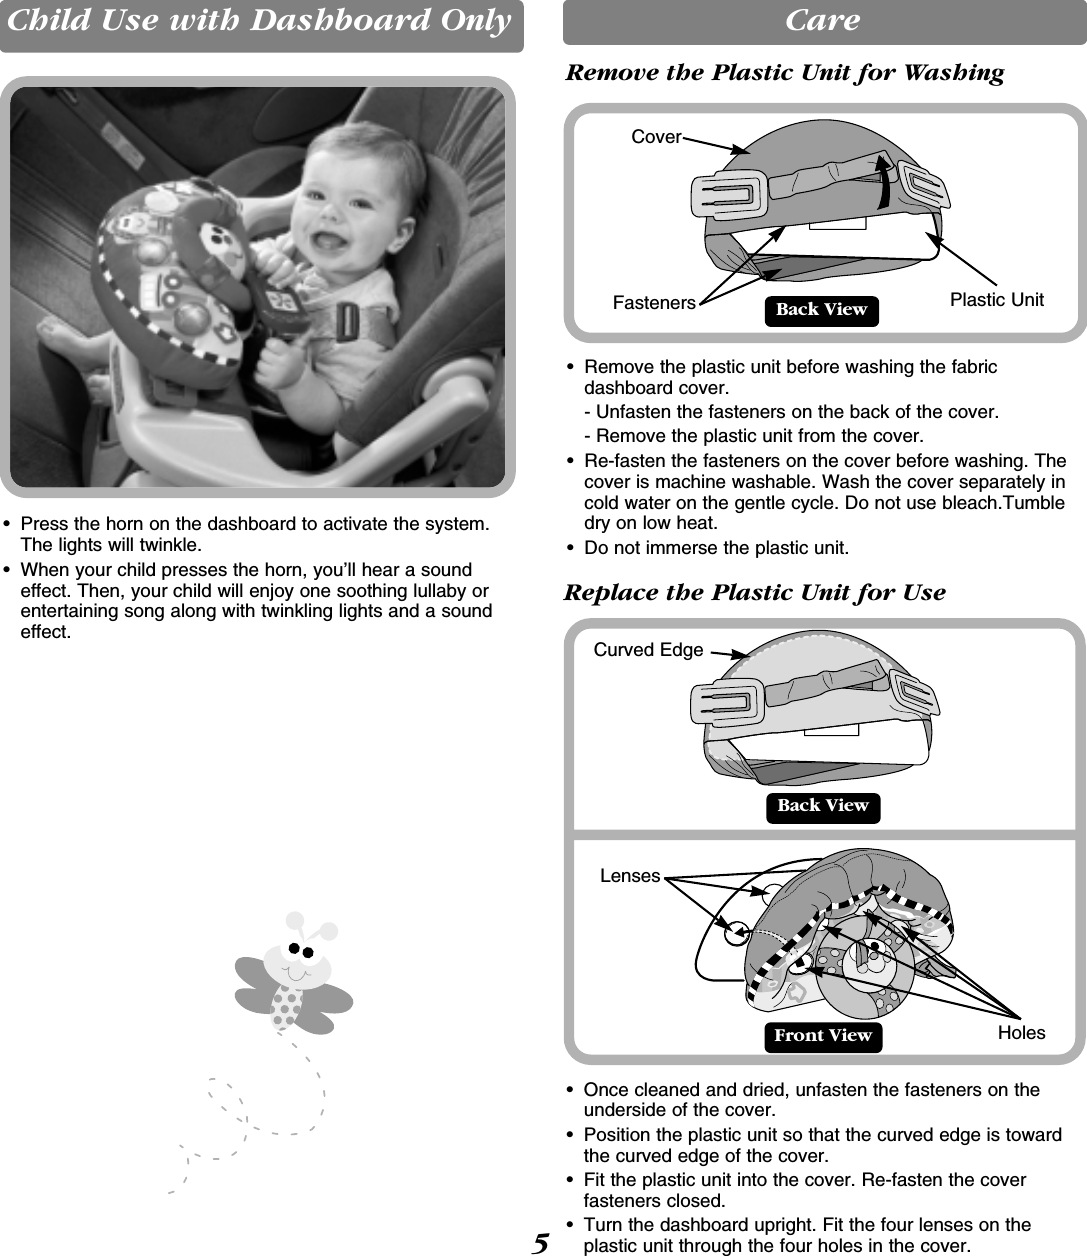 Child Use with Dashboard Only• Press the horn on the dashboard to activate the system.The lights will twinkle.• When your child presses the horn, you’ll hear a soundeffect. Then, your child will enjoy one soothing lullaby orentertaining song along with twinkling lights and a soundeffect.CareBack ViewFront ViewCurved Edge• Once cleaned and dried, unfasten the fasteners on theunderside of the cover. • Position the plastic unit so that the curved edge is towardthe curved edge of the cover.• Fit the plastic unit into the cover. Re-fasten the coverfasteners closed.• Turn the dashboard upright. Fit the four lenses on theplastic unit through the four holes in the cover.Back View• Remove the plastic unit before washing the fabric dashboard cover. - Unfasten the fasteners on the back of the cover. - Remove the plastic unit from the cover.• Re-fasten the fasteners on the cover before washing. Thecover is machine washable. Wash the cover separately incold water on the gentle cycle. Do not use bleach.Tumbledry on low heat. • Do not immerse the plastic unit.Plastic UnitCoverFasteners5Remove the Plastic Unit for WashingReplace the Plastic Unit for UseLensesHoles